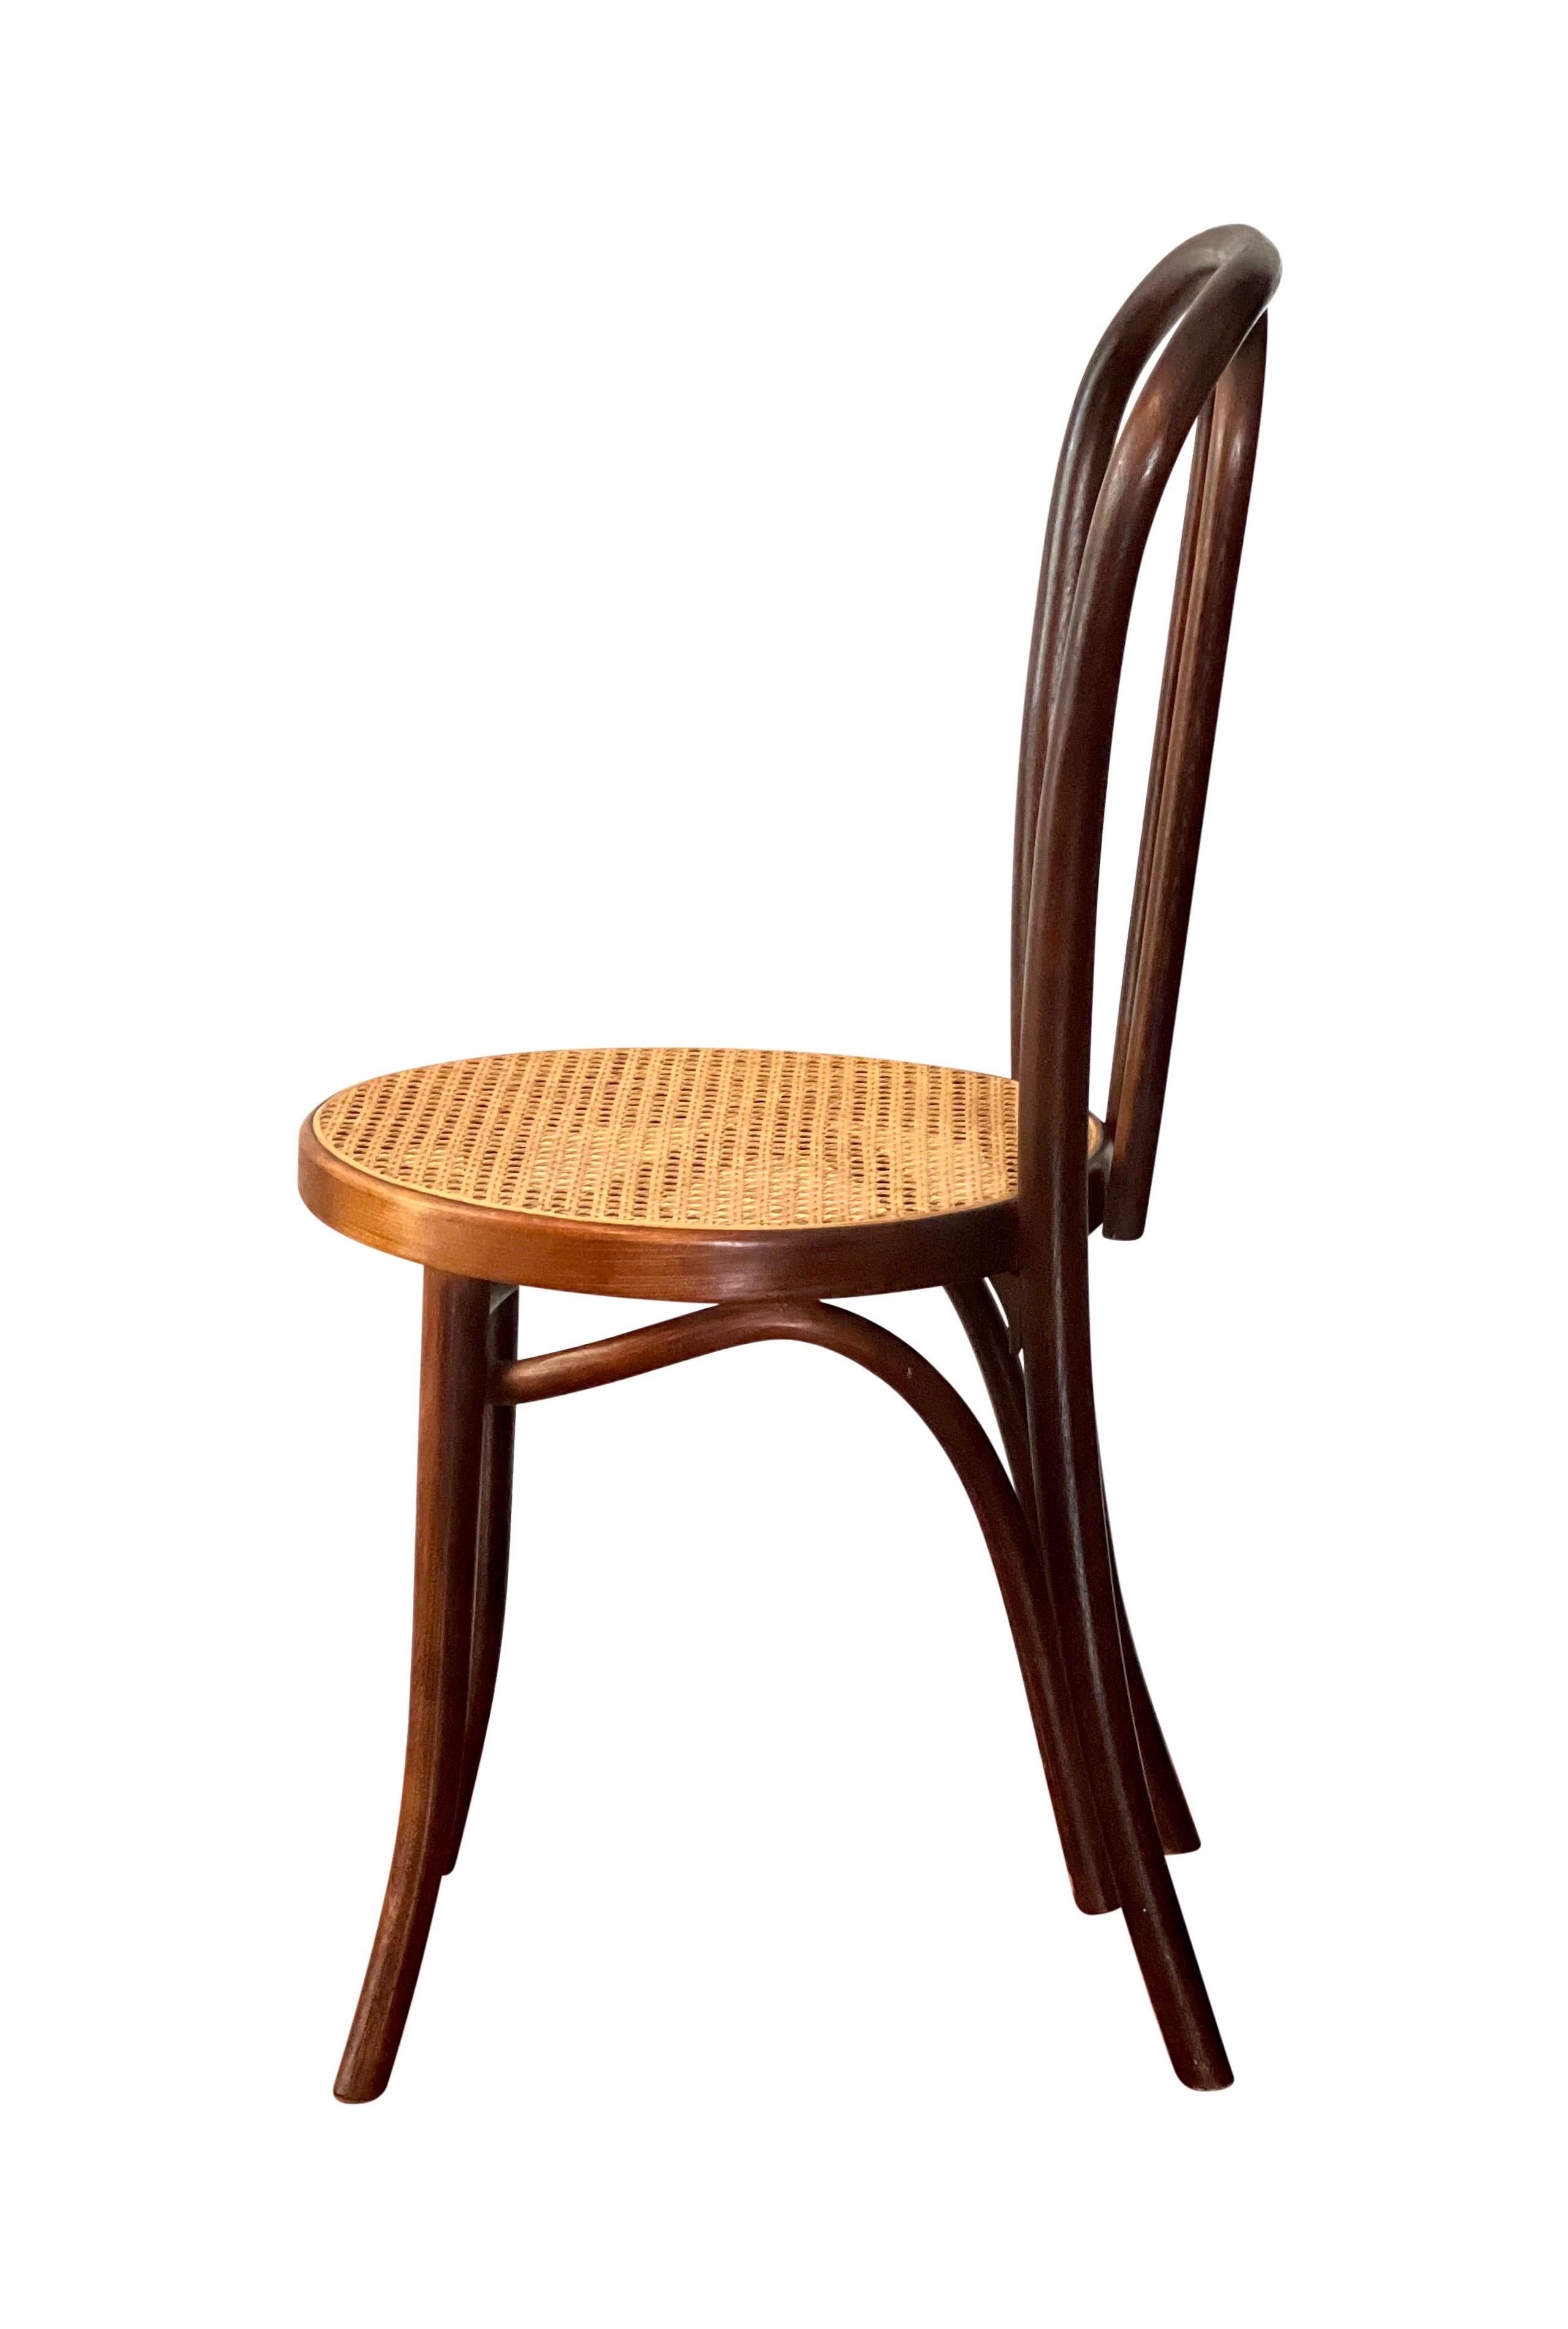 European Thonet Bentwood Cane Bistro or Side Chair, 1920's For Sale